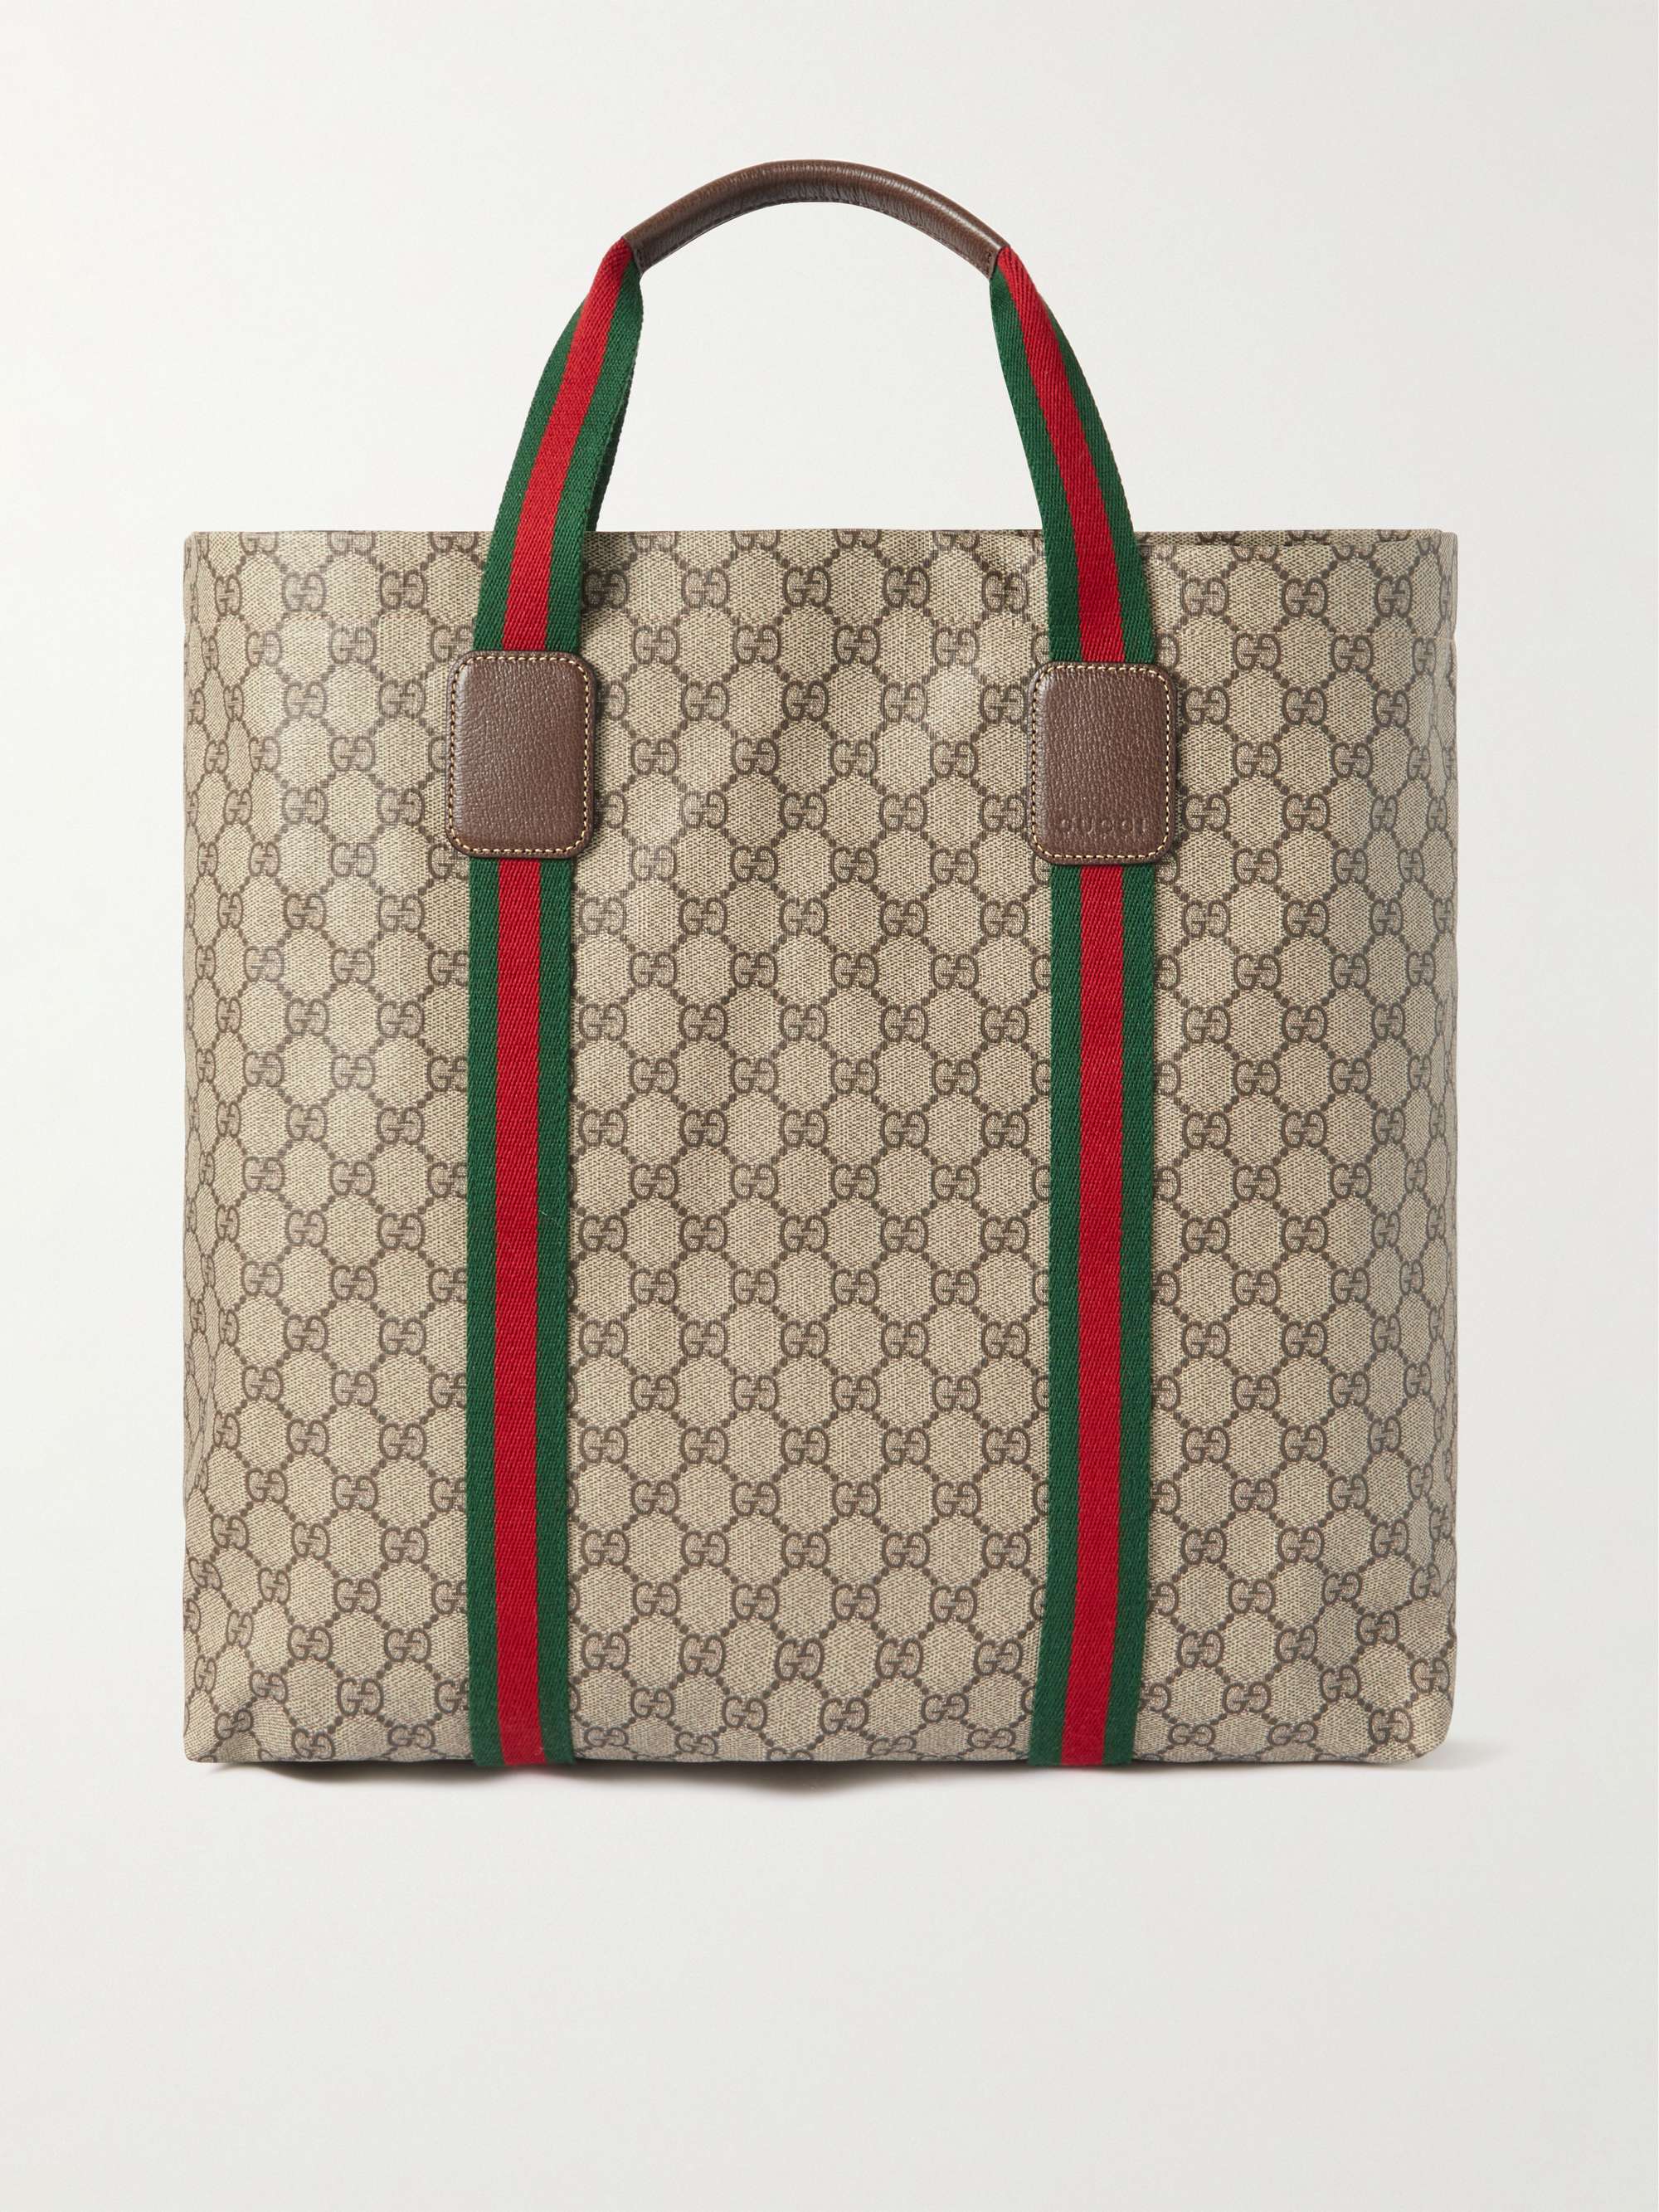 GUCCI Ophidia Leather-Trimmed Monogrammed Supreme Coated-Canvas